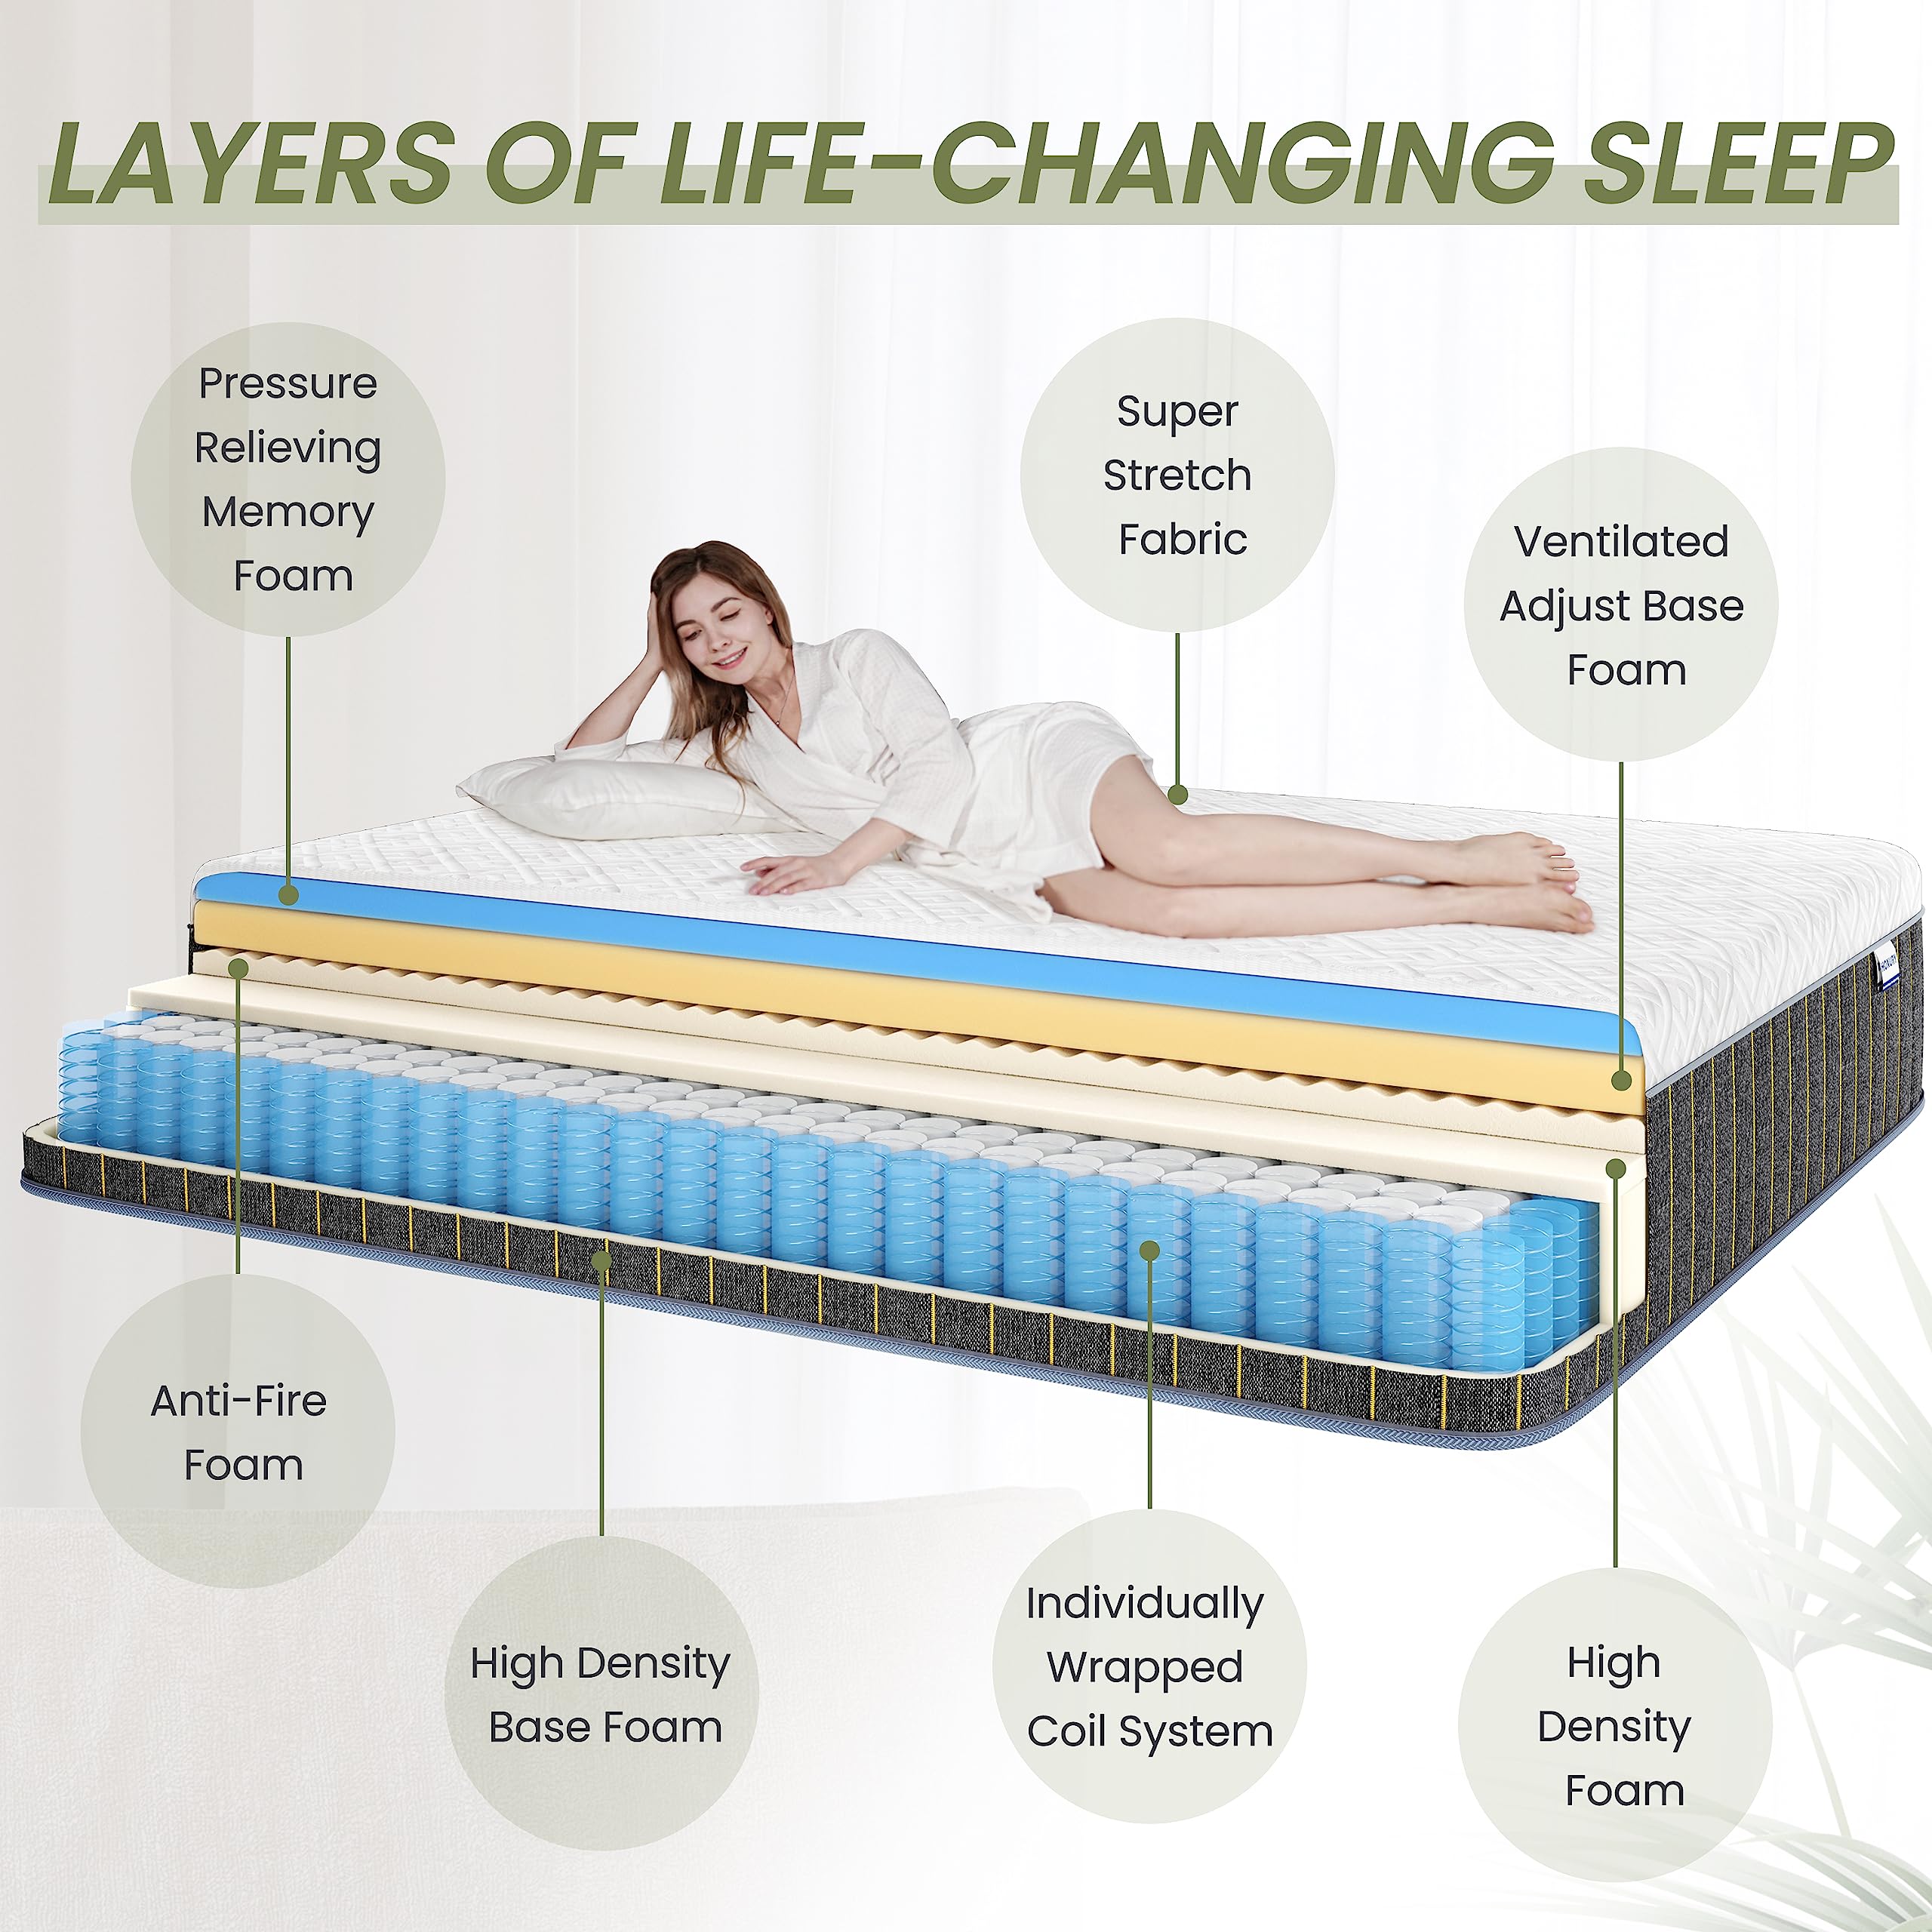 HOXURY Queen Mattresses, 8 Inch Hybrid Mattress Queen Size, Memory Foam & Individually Wrapped Pocket Coils Innerspring Mattress in a Box, Pressure Relief & Cooler Sleeping